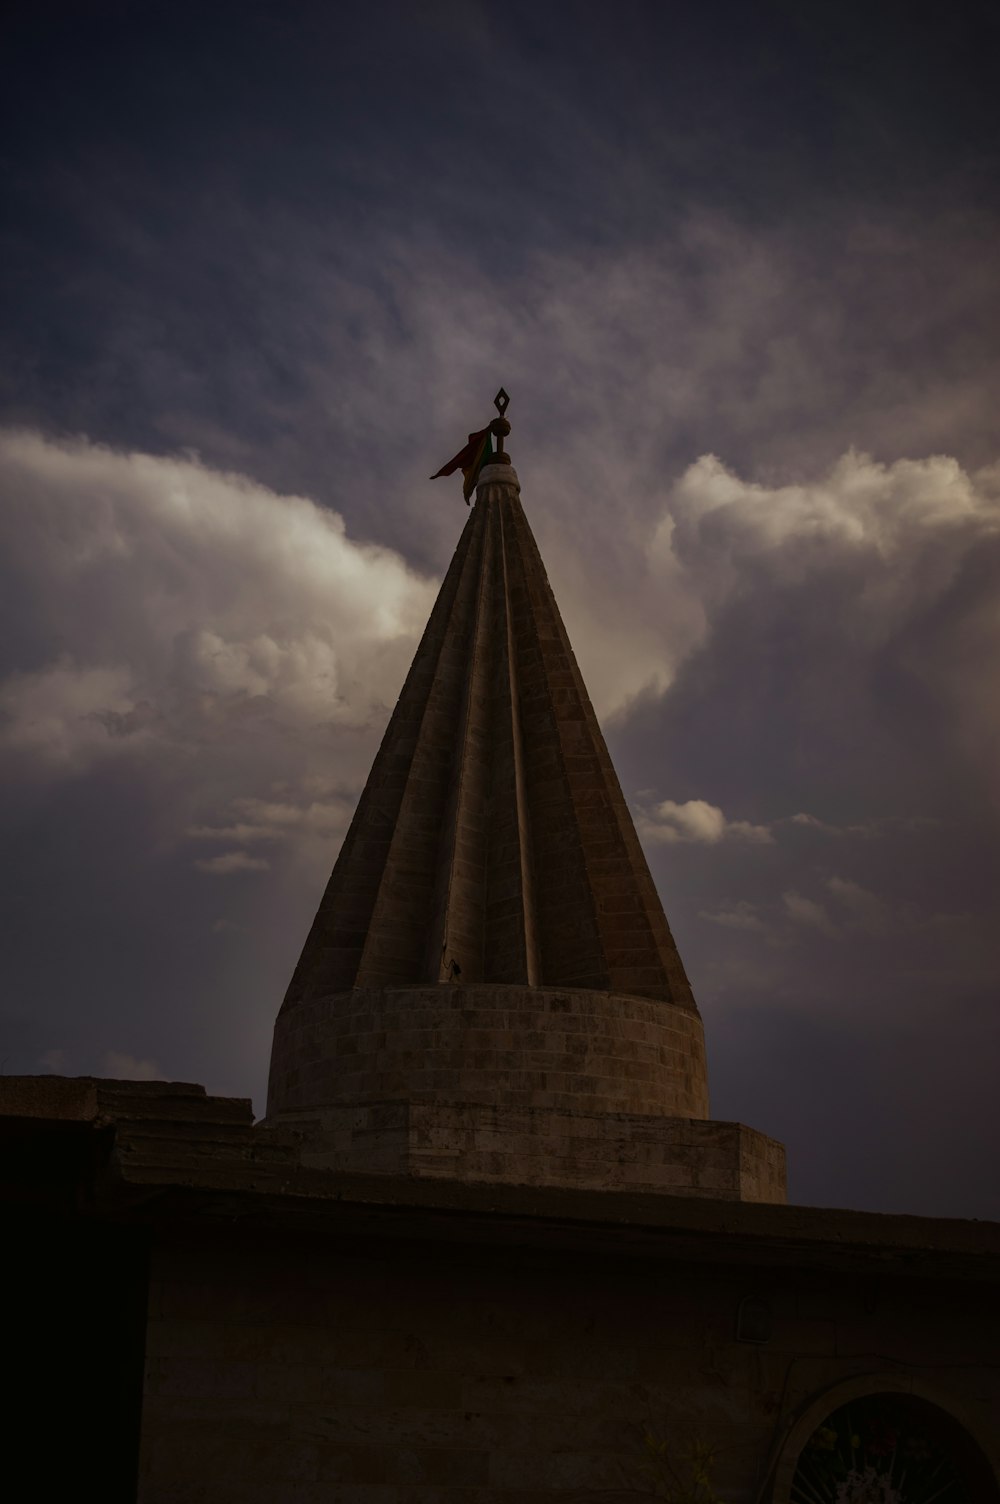 man in black jacket standing on top of gray concrete tower under cloudy sky during daytime